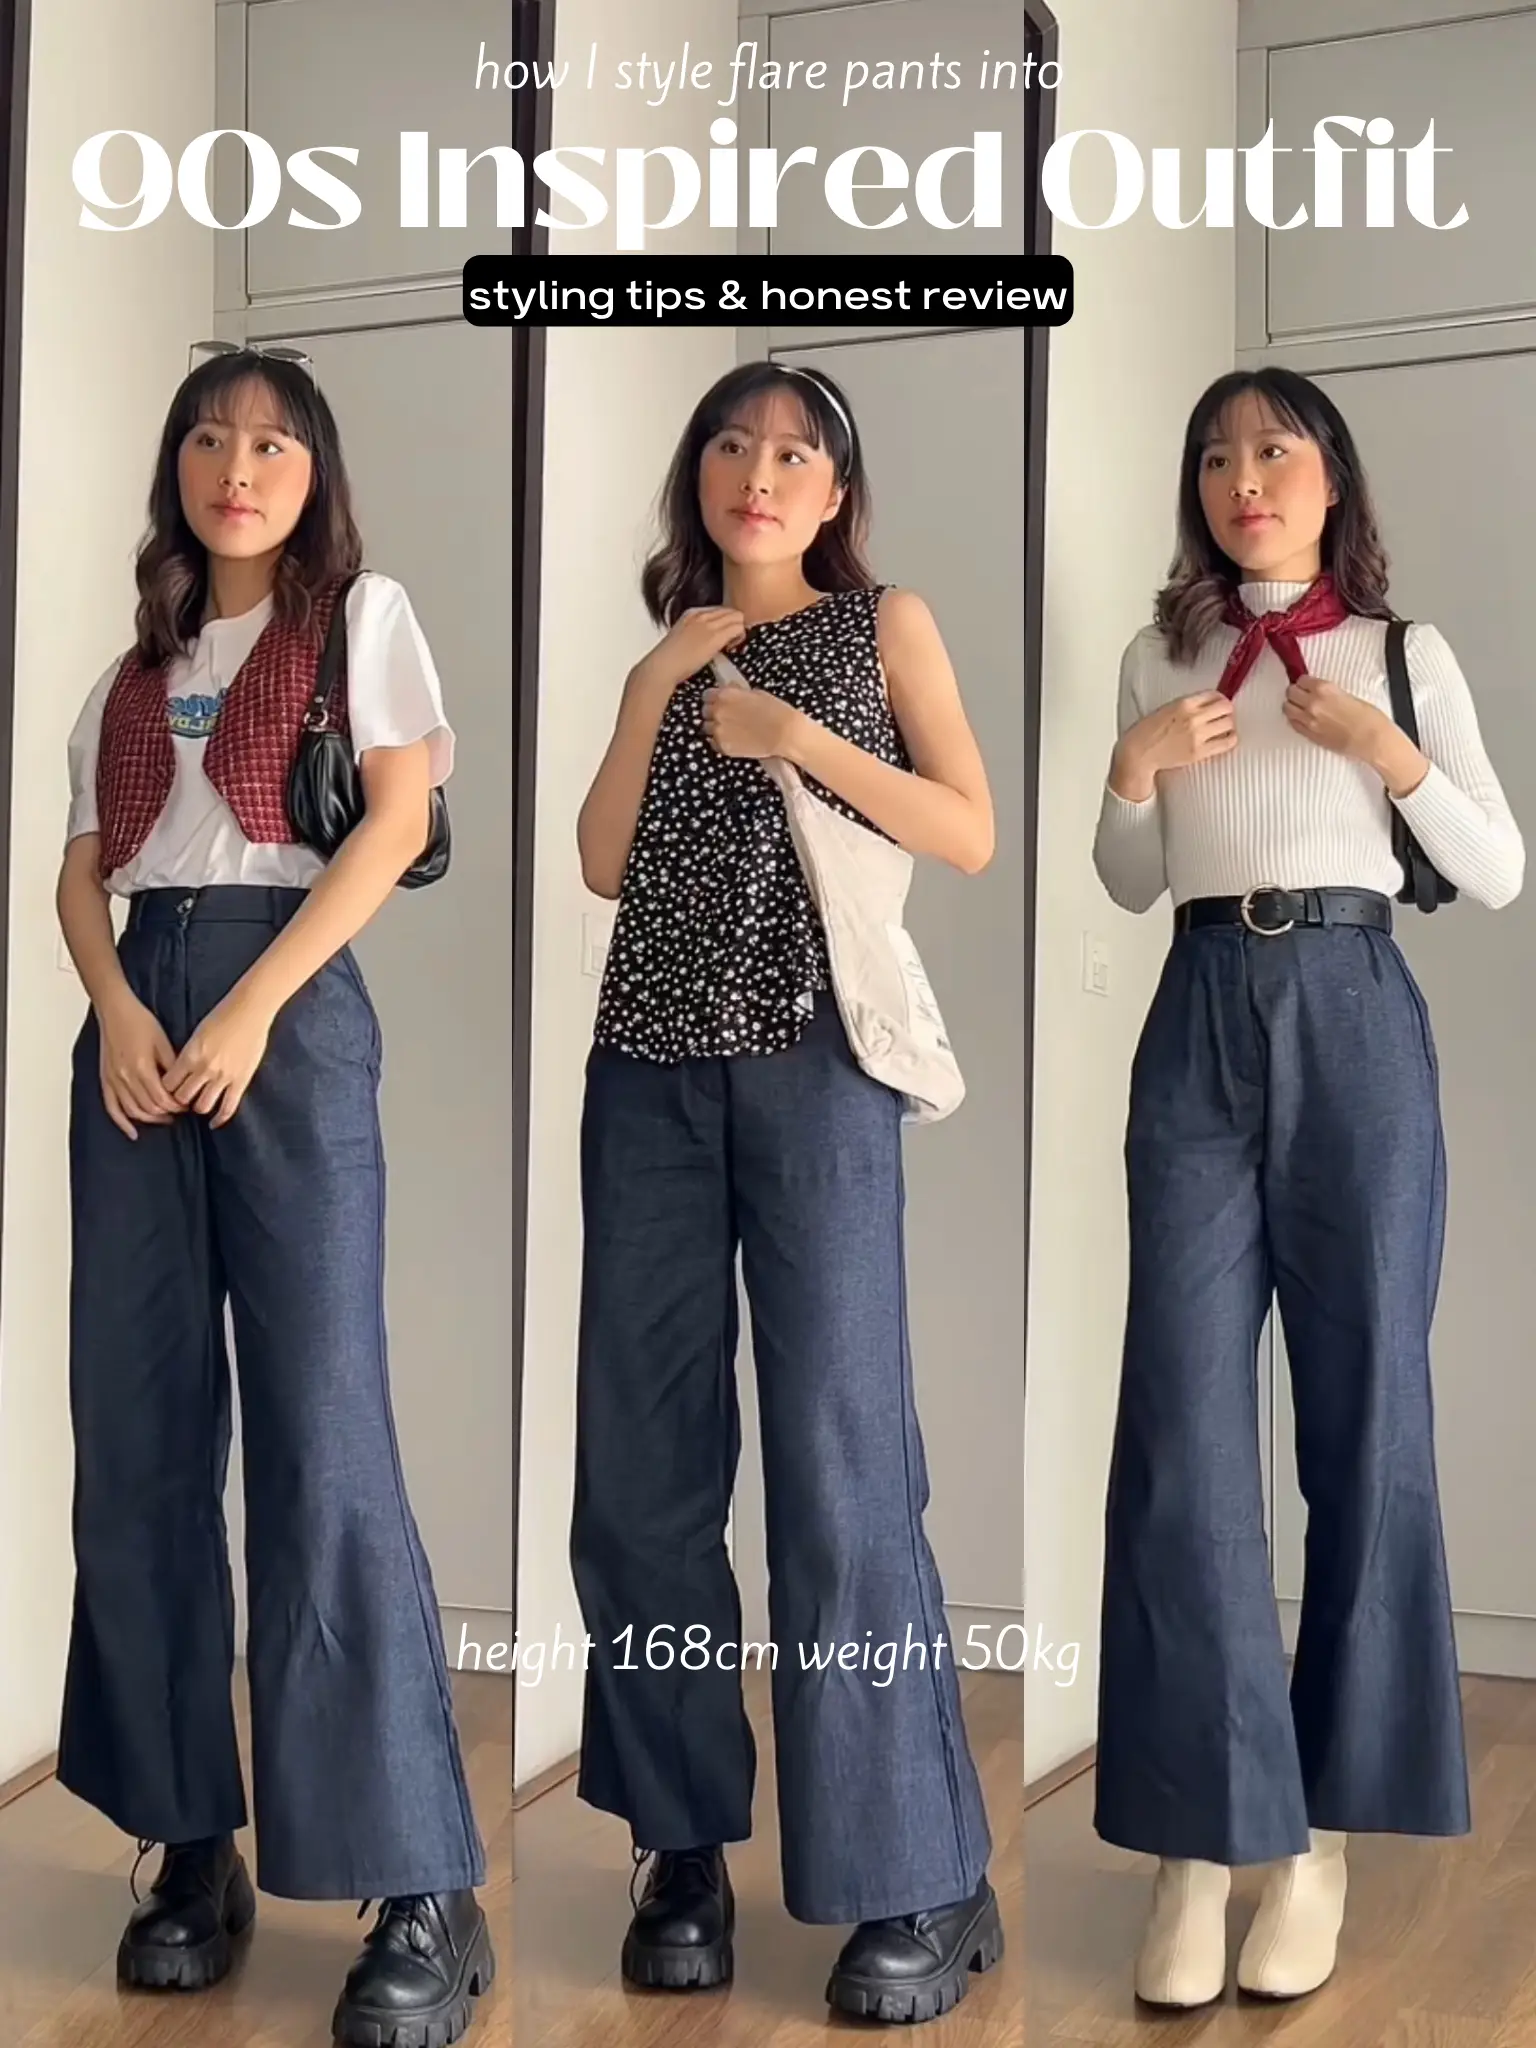 Making Flare Pants Work For Triangle-Shaped Body